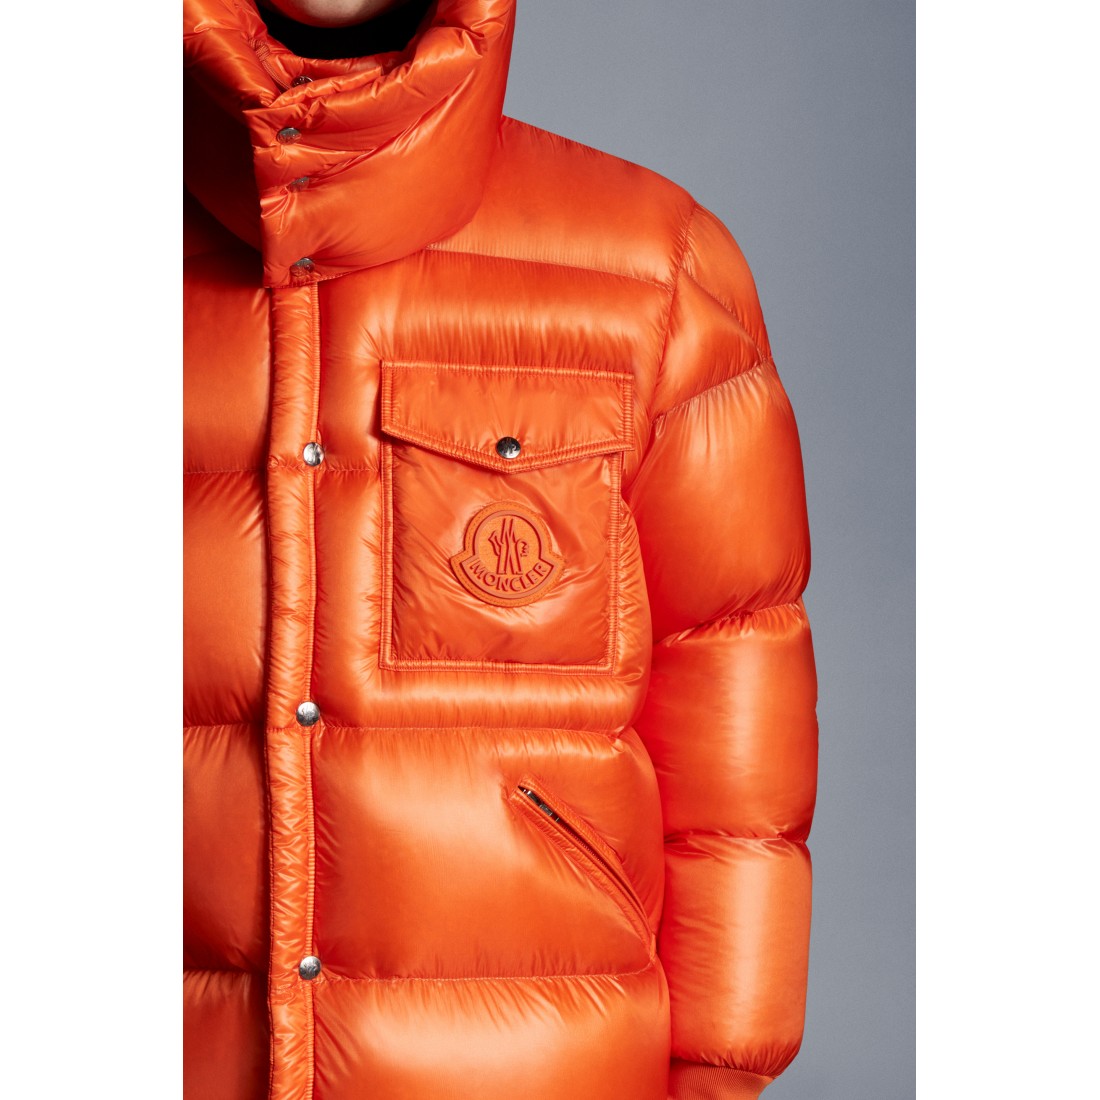 New Lower Prices 2022 Moncler Lamentin Short Down Jacket Mens Hooded ...